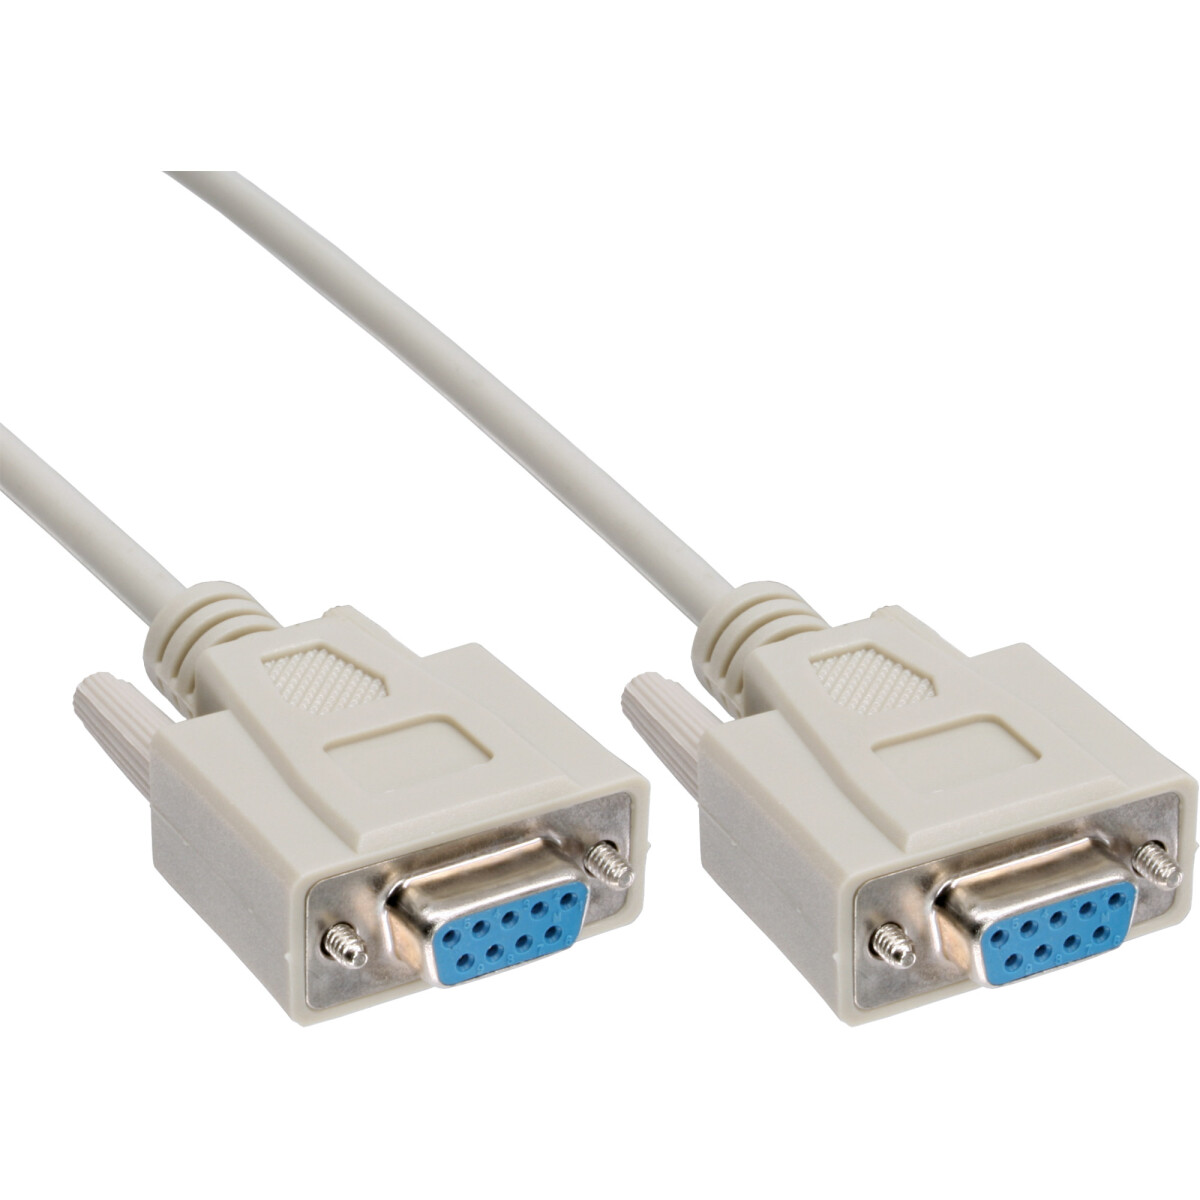 InLine® null modem cable DB9 female / female, molded,...